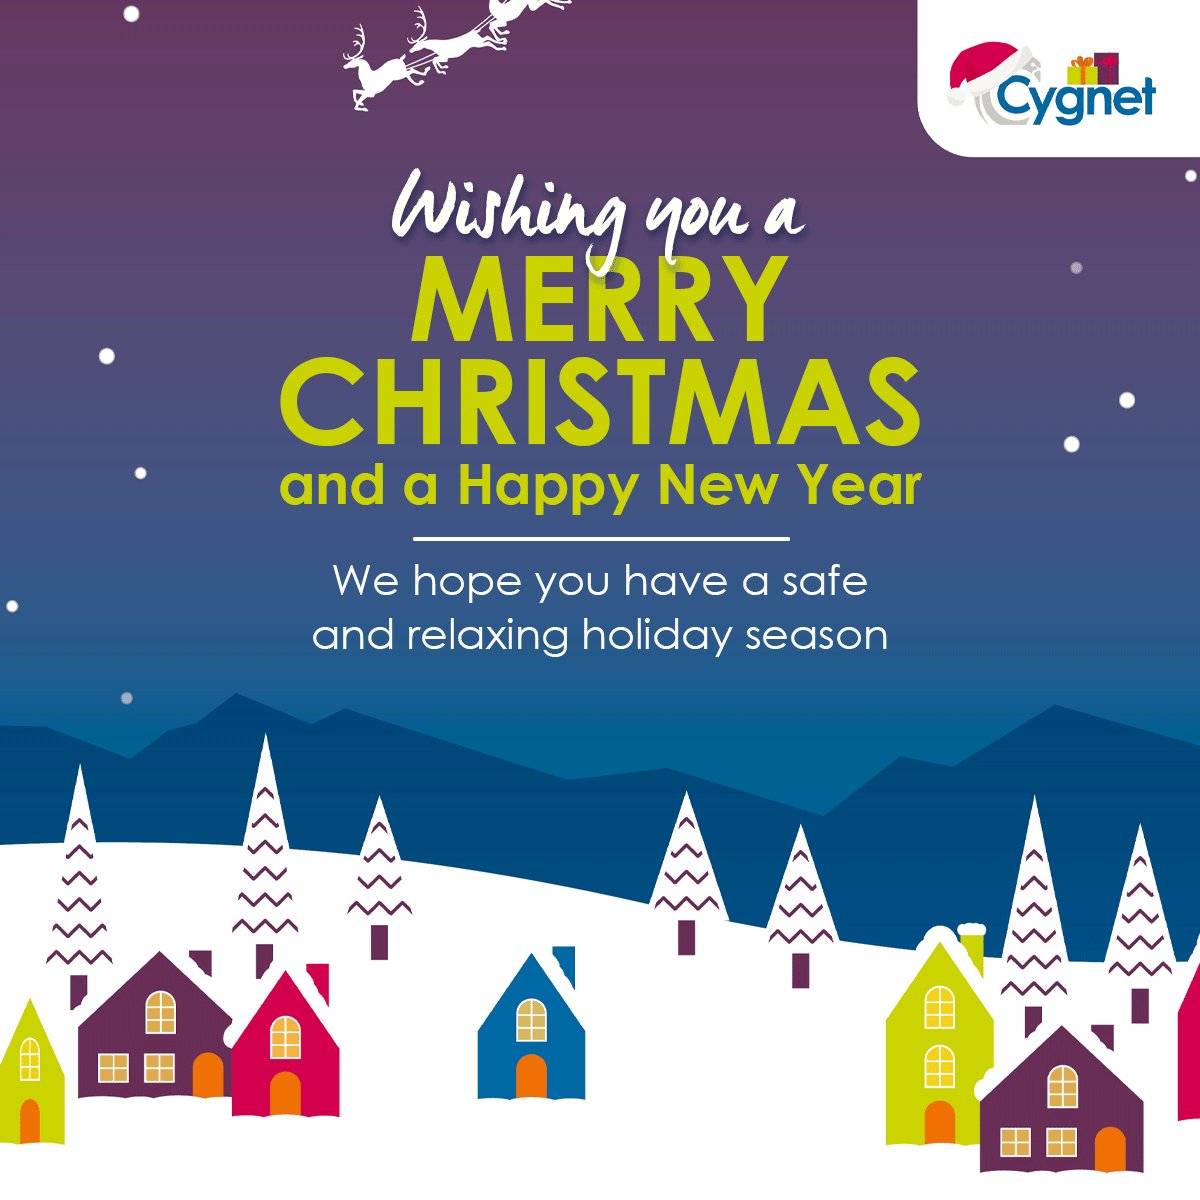 Wishing you all a very Merry Christmas from all of us at Cygnet.